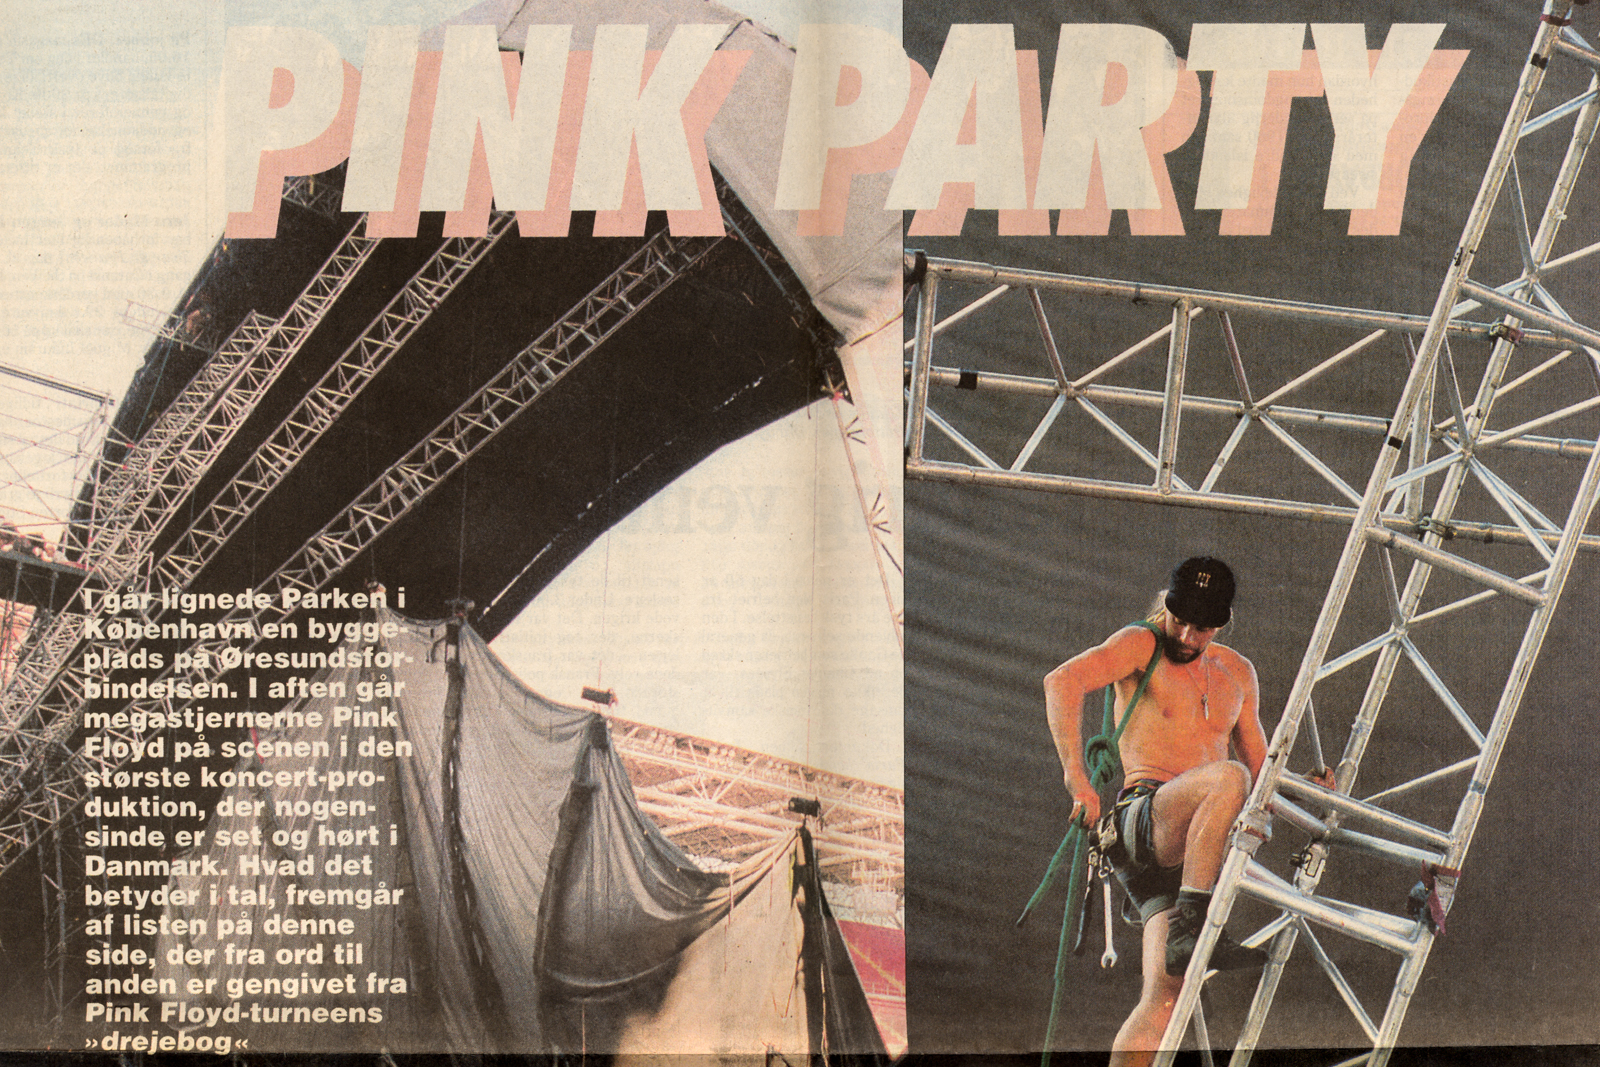 Article from Berlingske tidende on the upcoming Pink Floyd concert in Parken on August 25th, 1994.